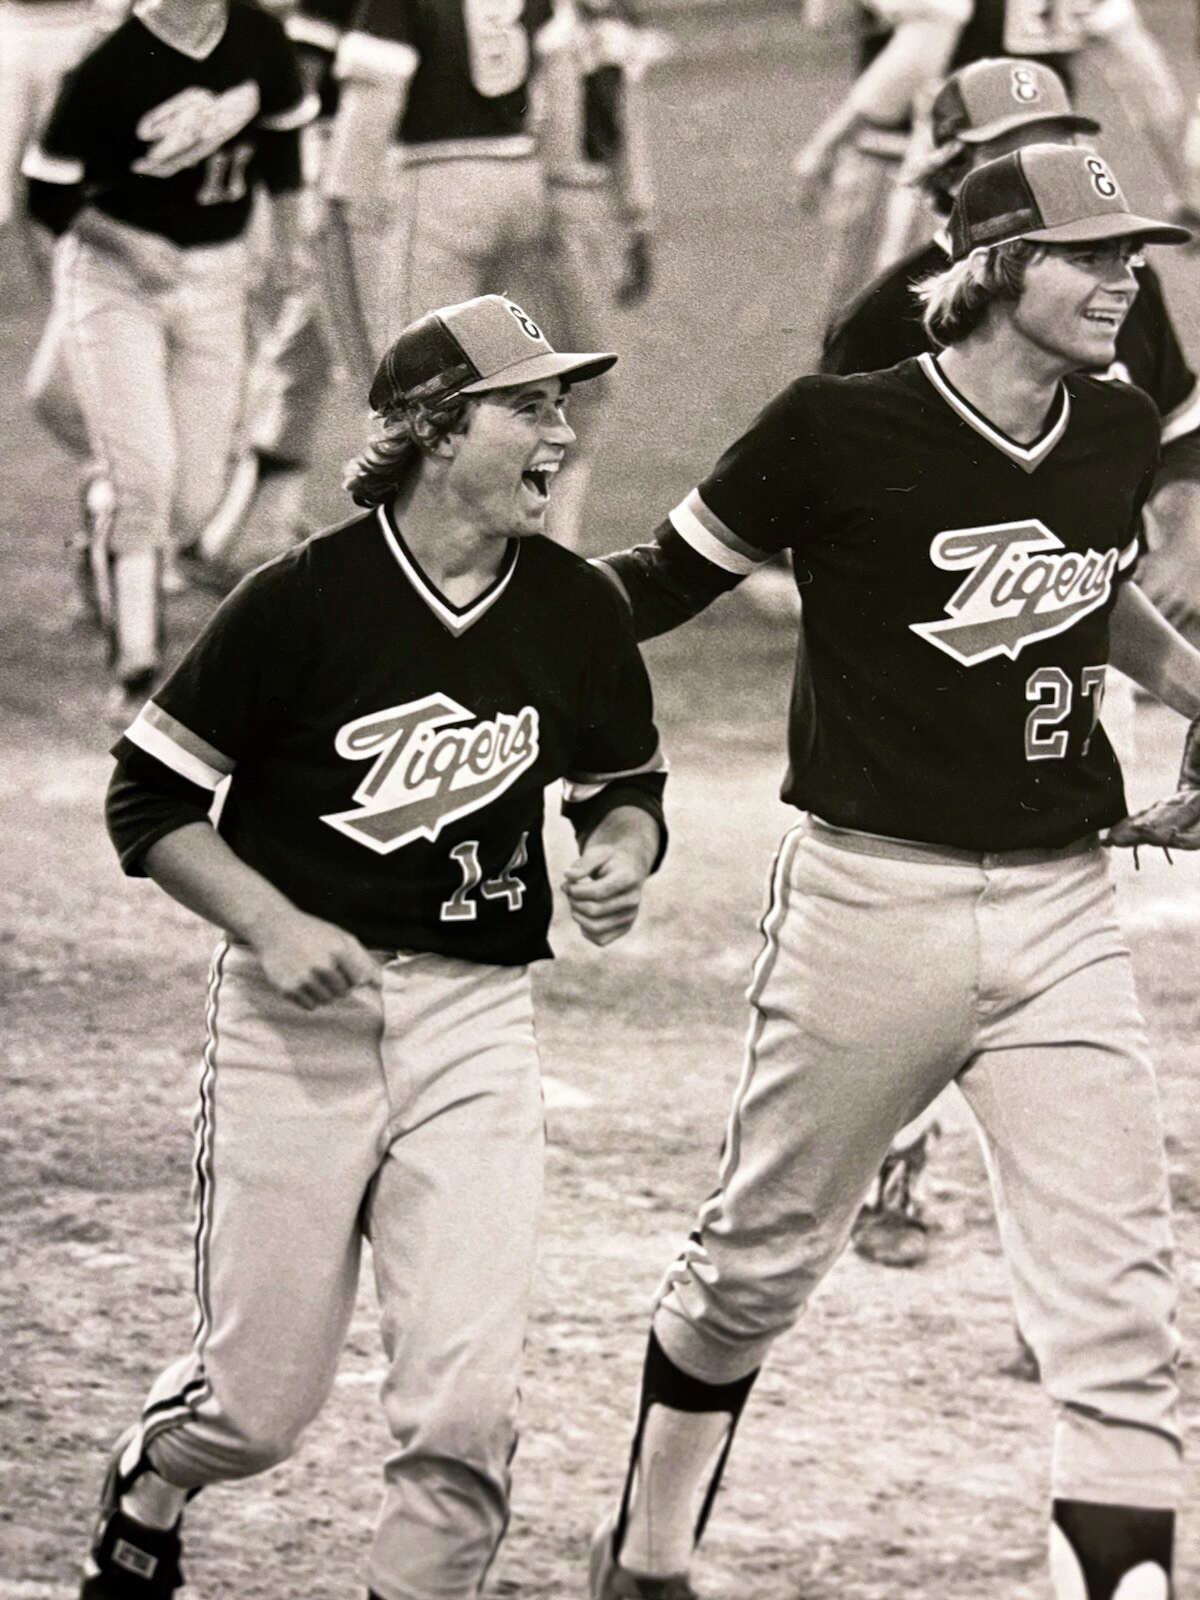 Edwardsville’s Todd Hansel, left, and teammate Scott Gerdes celebrate after the Tigers’ 1-0 win over win over 1-0 over Elk Grove Village in the Class AA quarterfinals in 1982. Hansel drove in the only run.